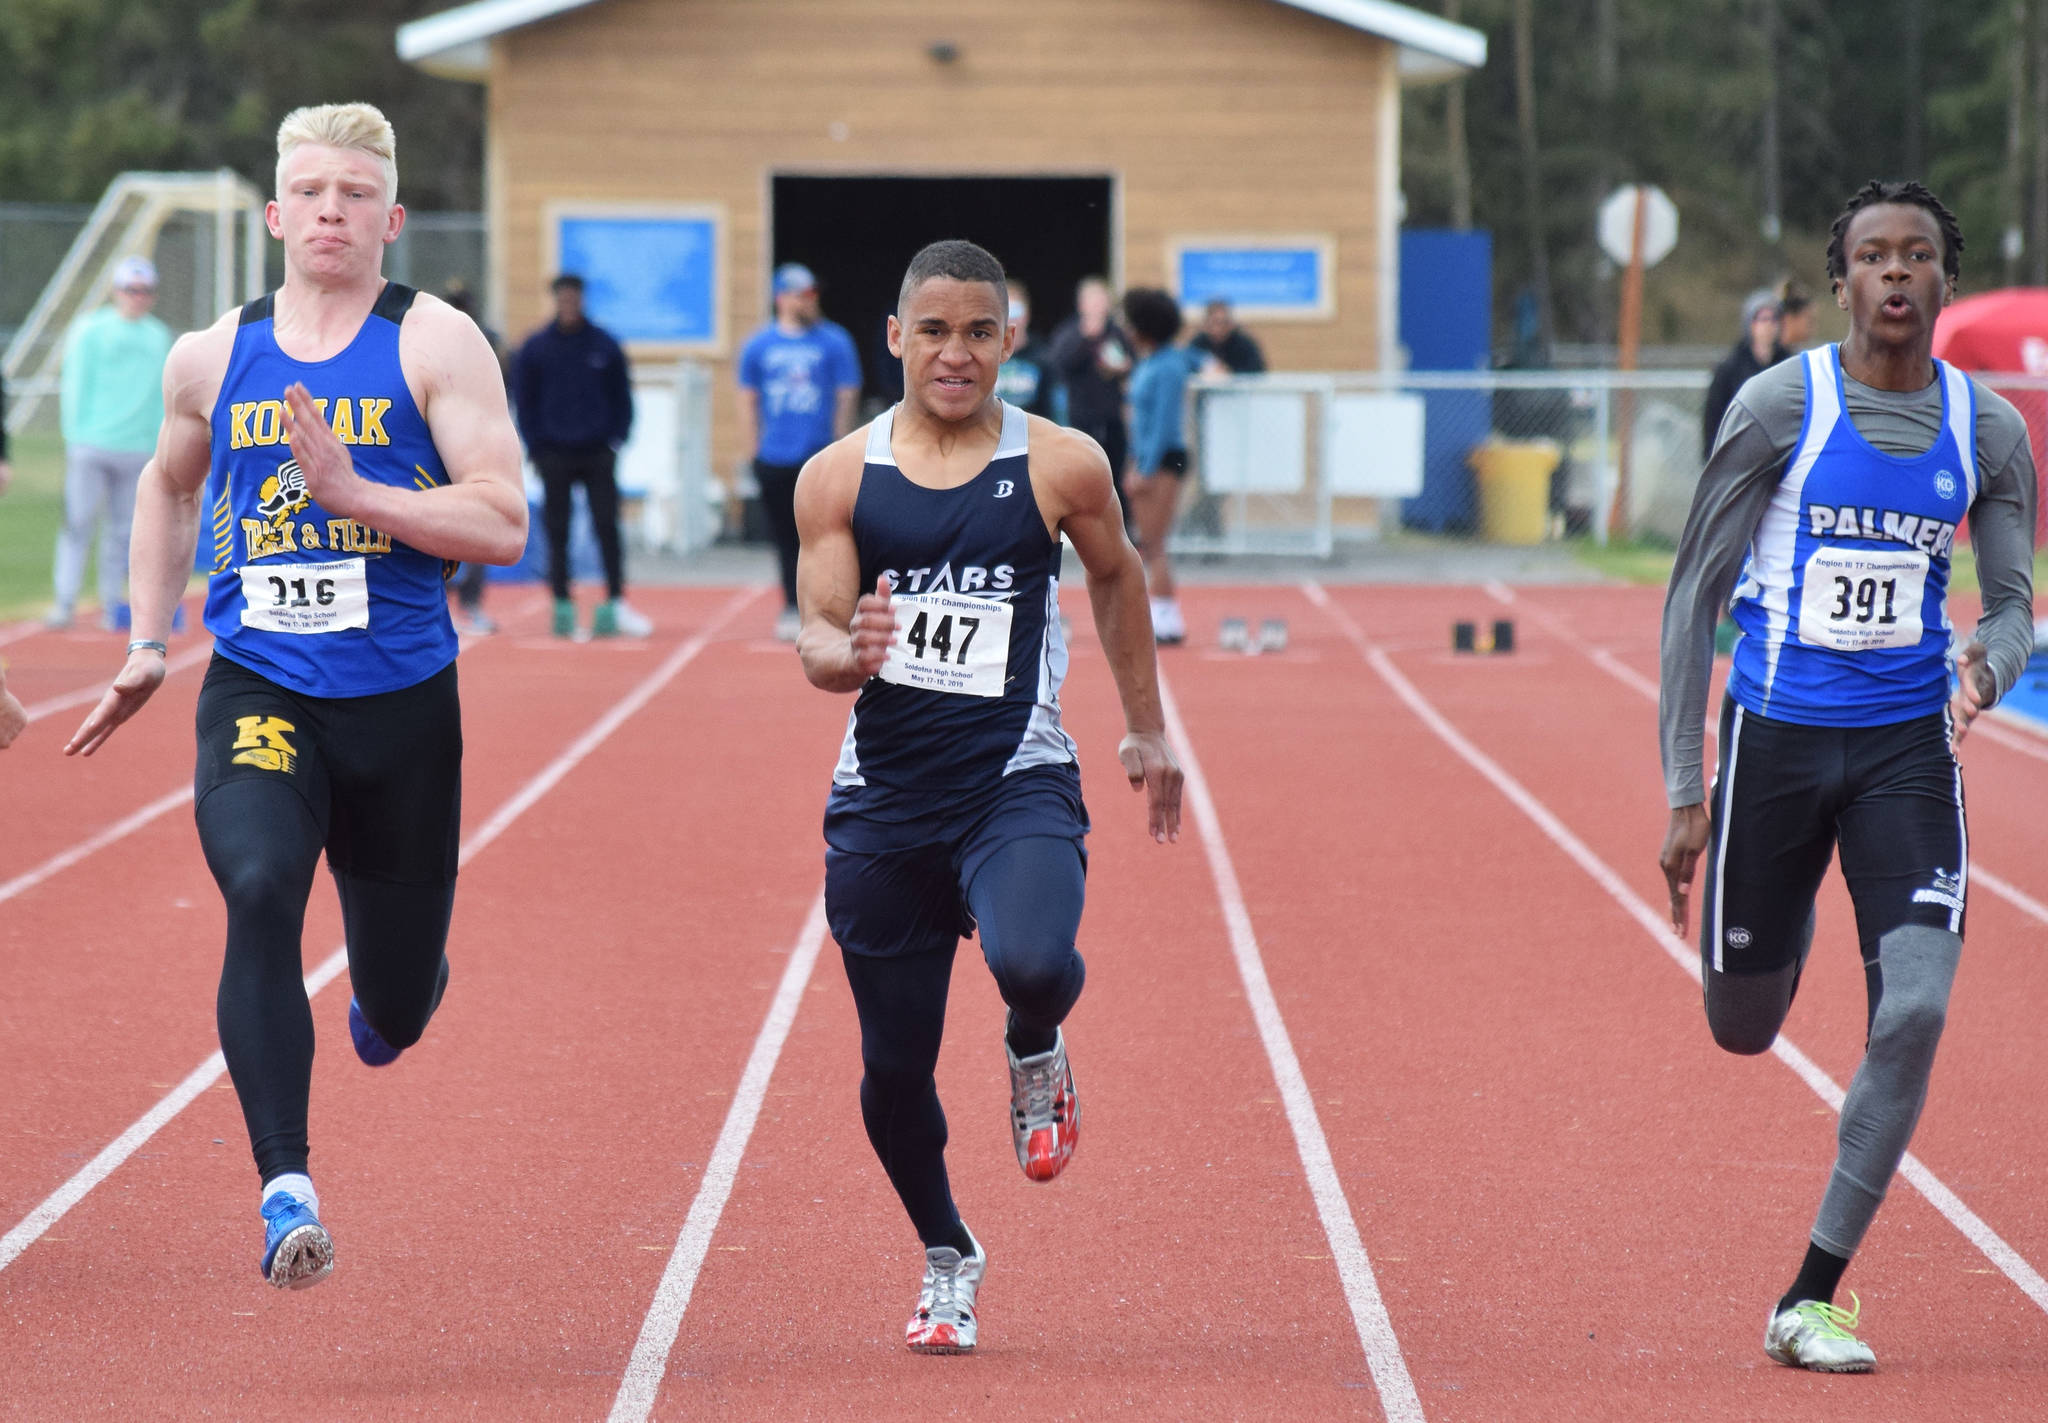 Soldotna’s Ben Booth (middle) races in the Class 4A boys 100-meter final Saturday at the Region III Track and Field Championships in Soldotna. (Photo by Joey Klecka/Peninsula Clarion)